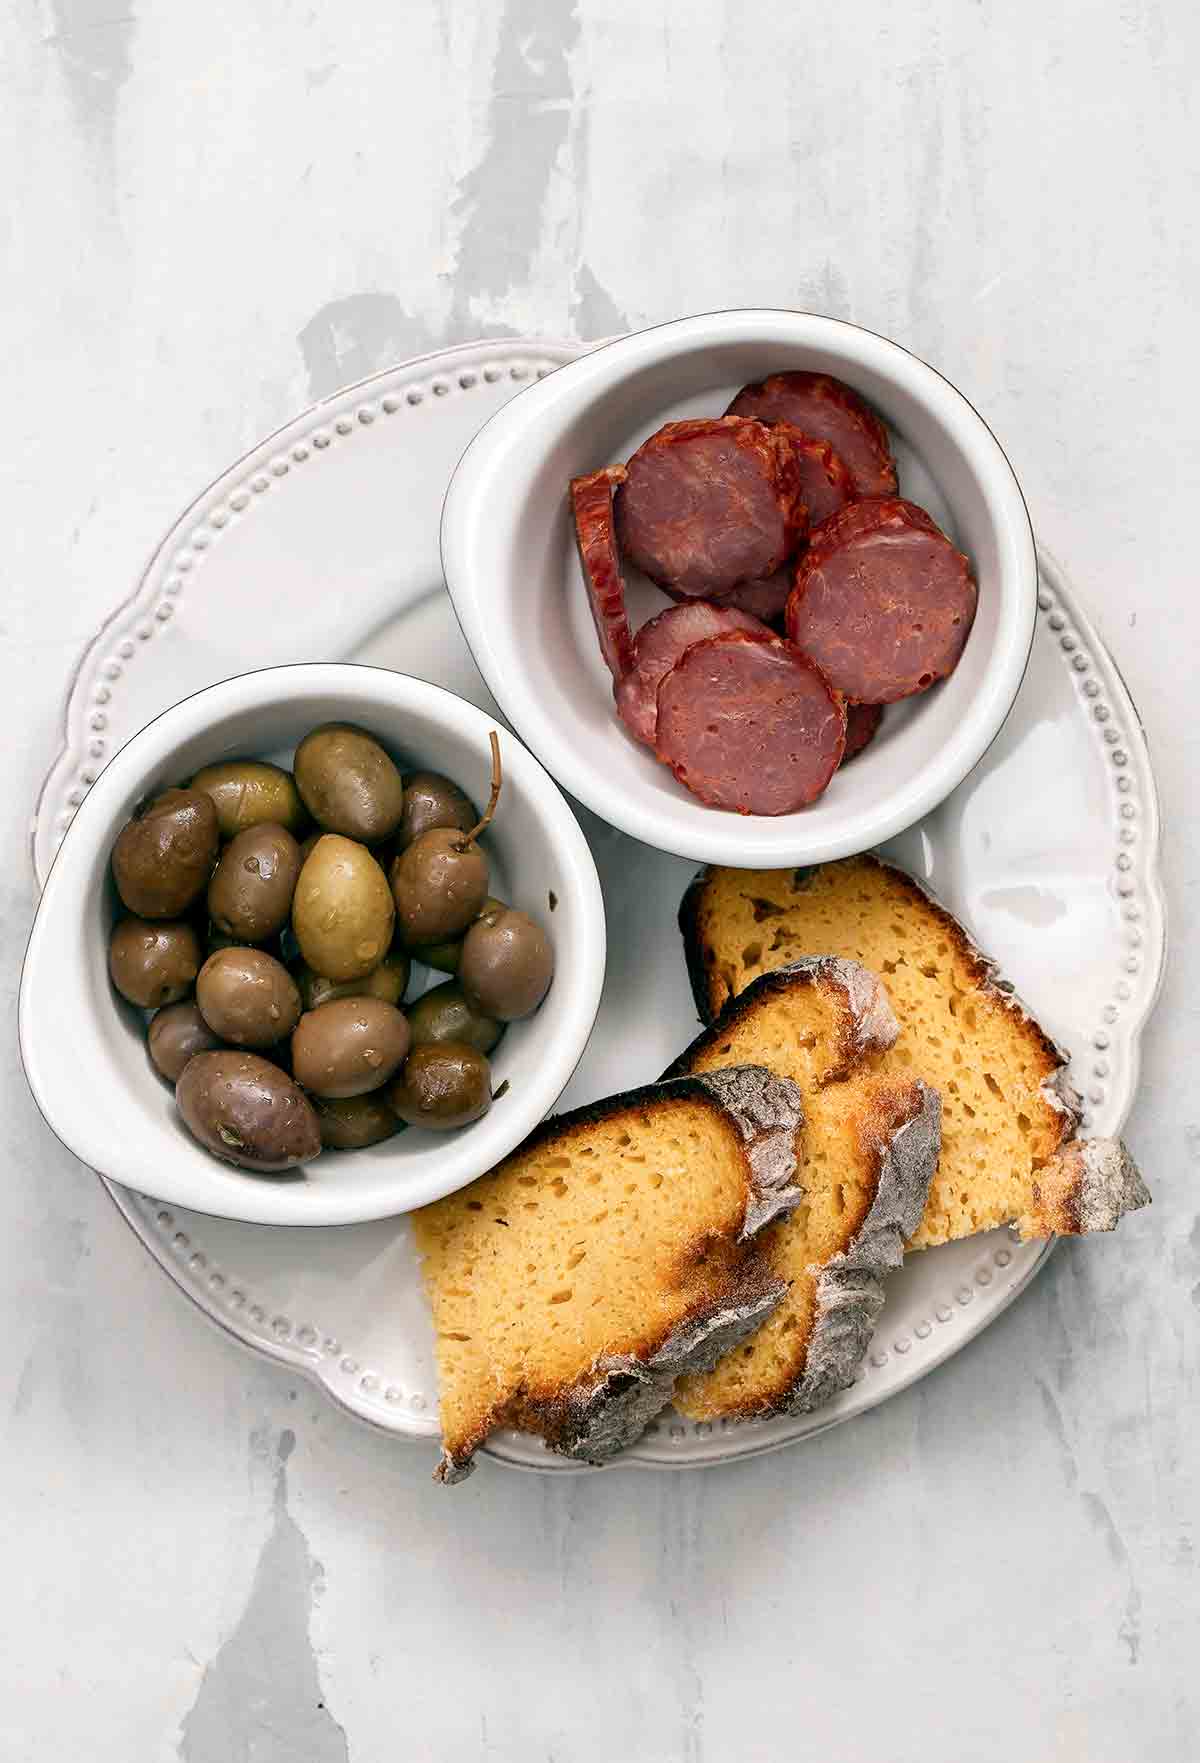 Slices of broa, or Portuguese corn bread, on a plate with a bowl of olives and an bowl of choiriço sliced